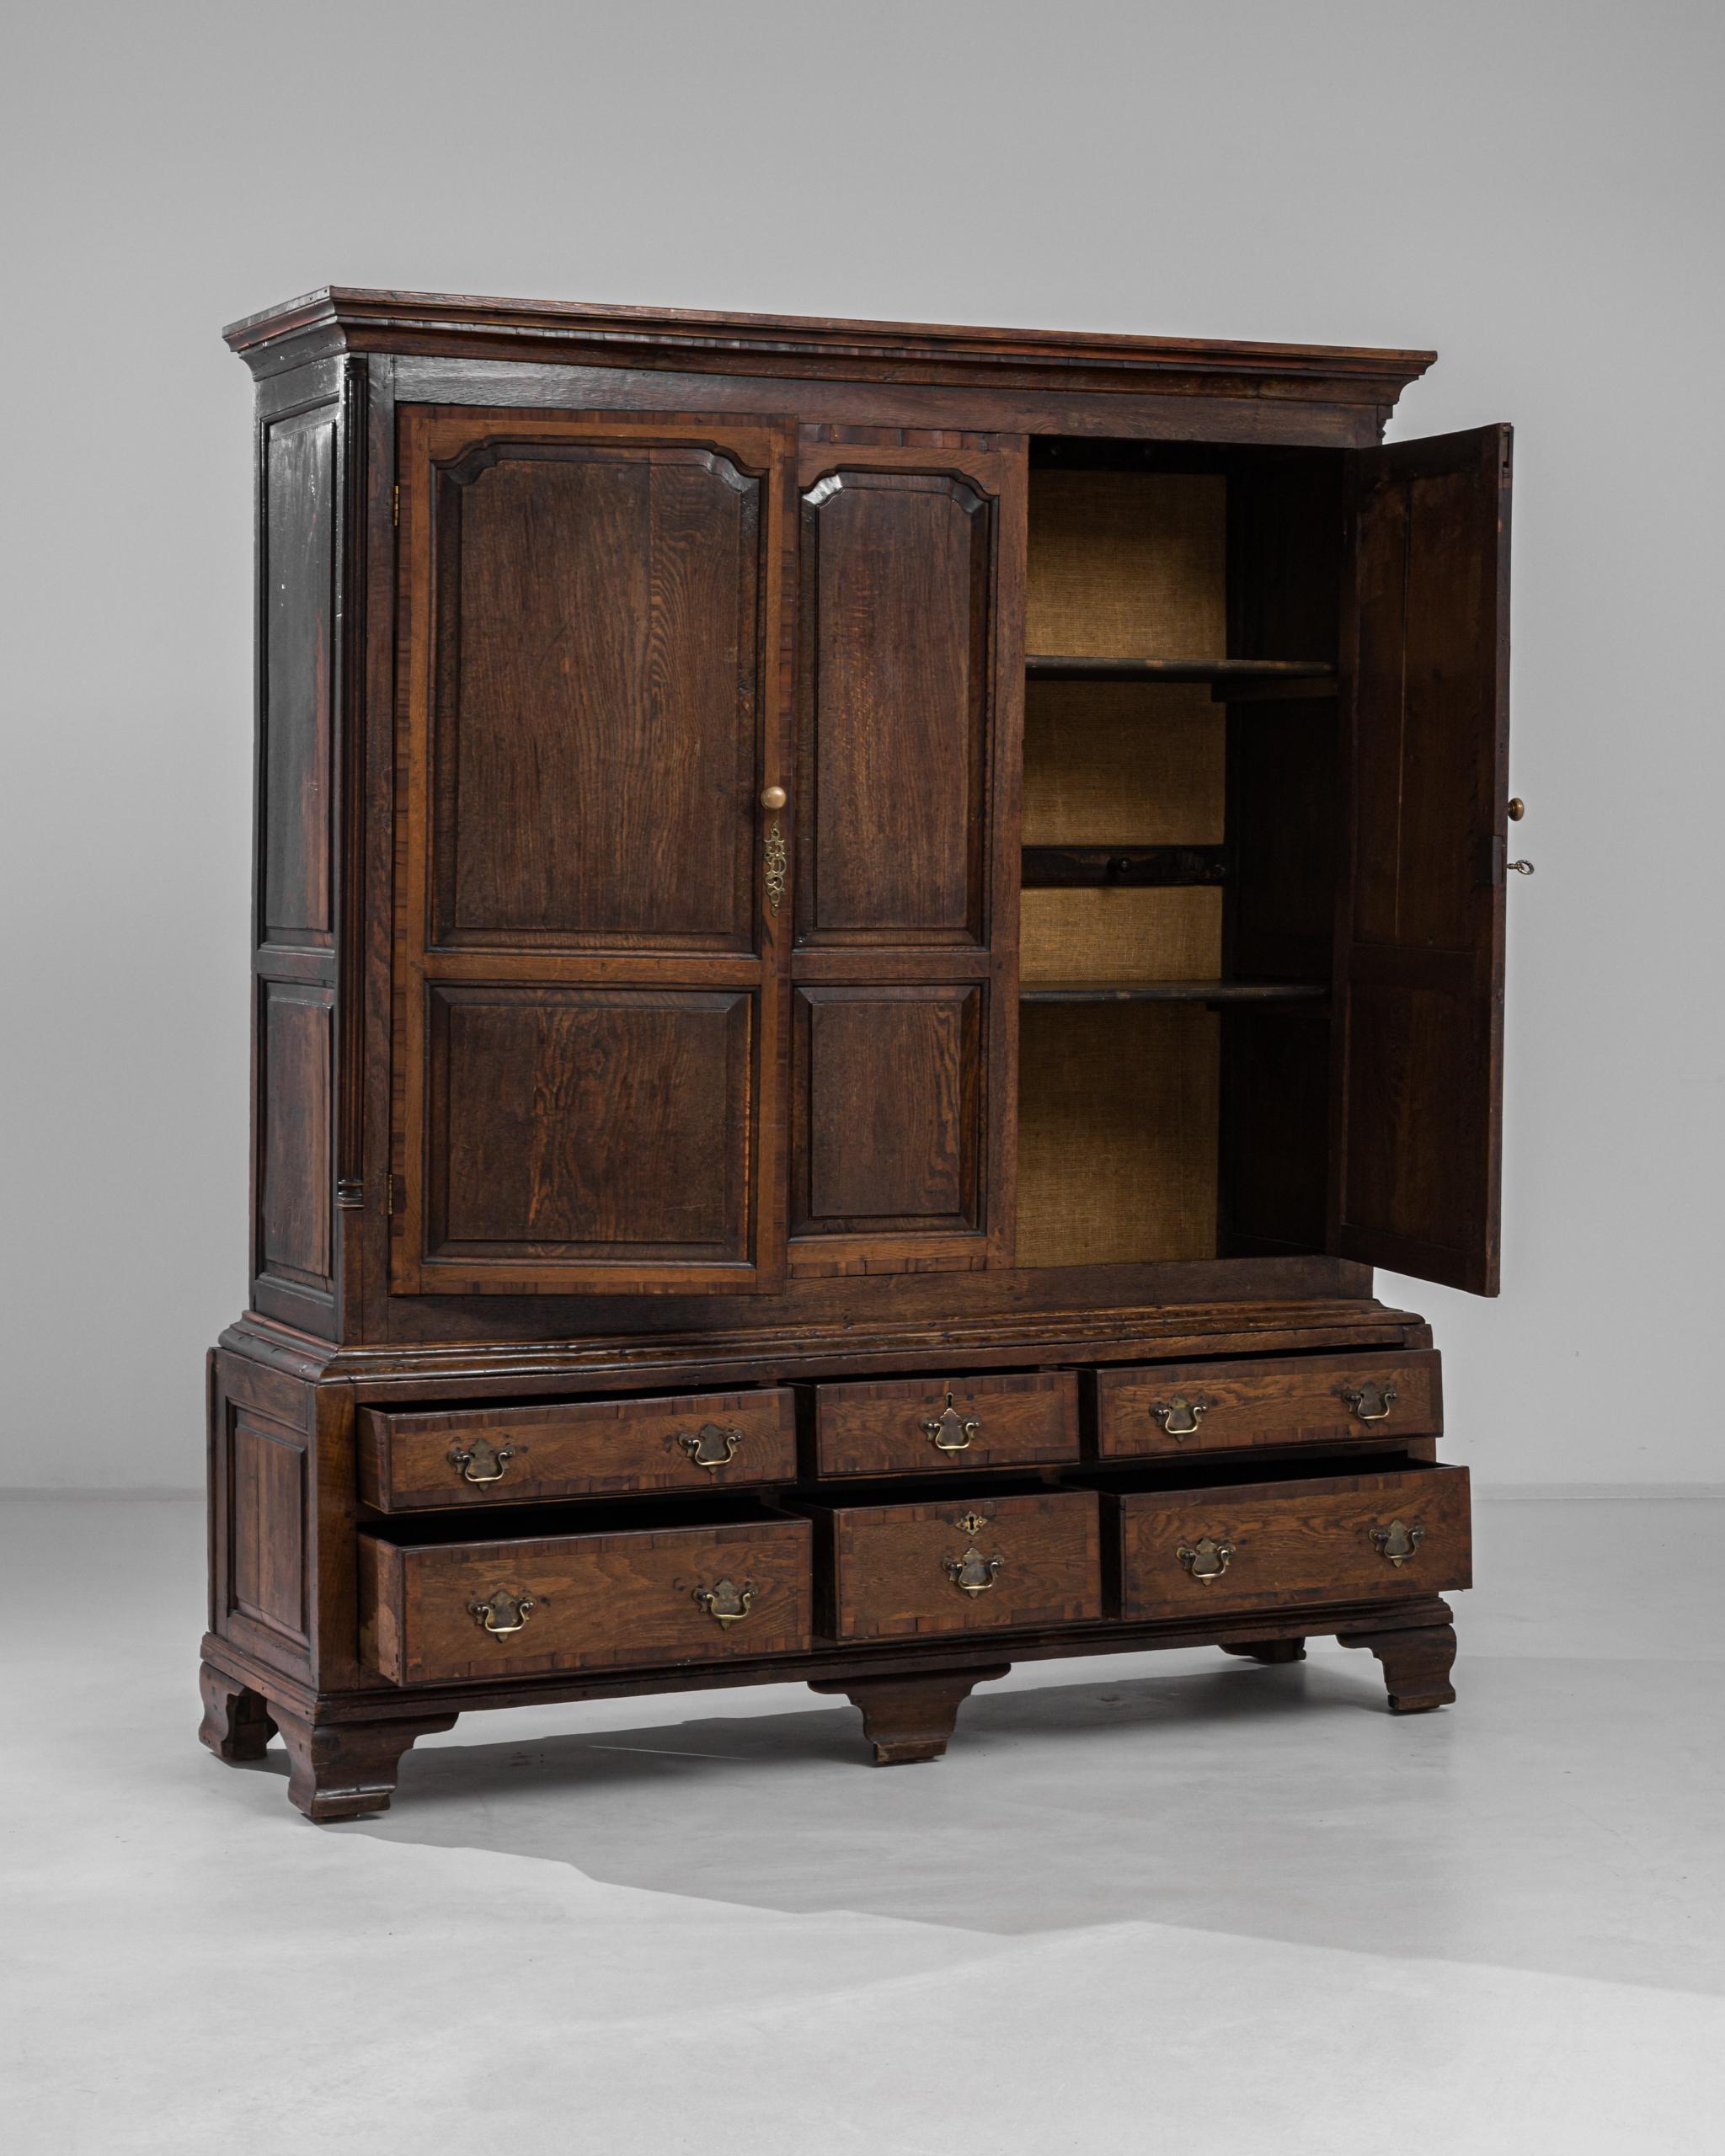 A dark wooden cabinet with brass hardware, circa 1870s England. Dark and warm oak panels comprise a large and elaborate structure. Lined with numerous drawers faced with an arch motif, this cabinet offers a sumptuous storage piece that will elevate